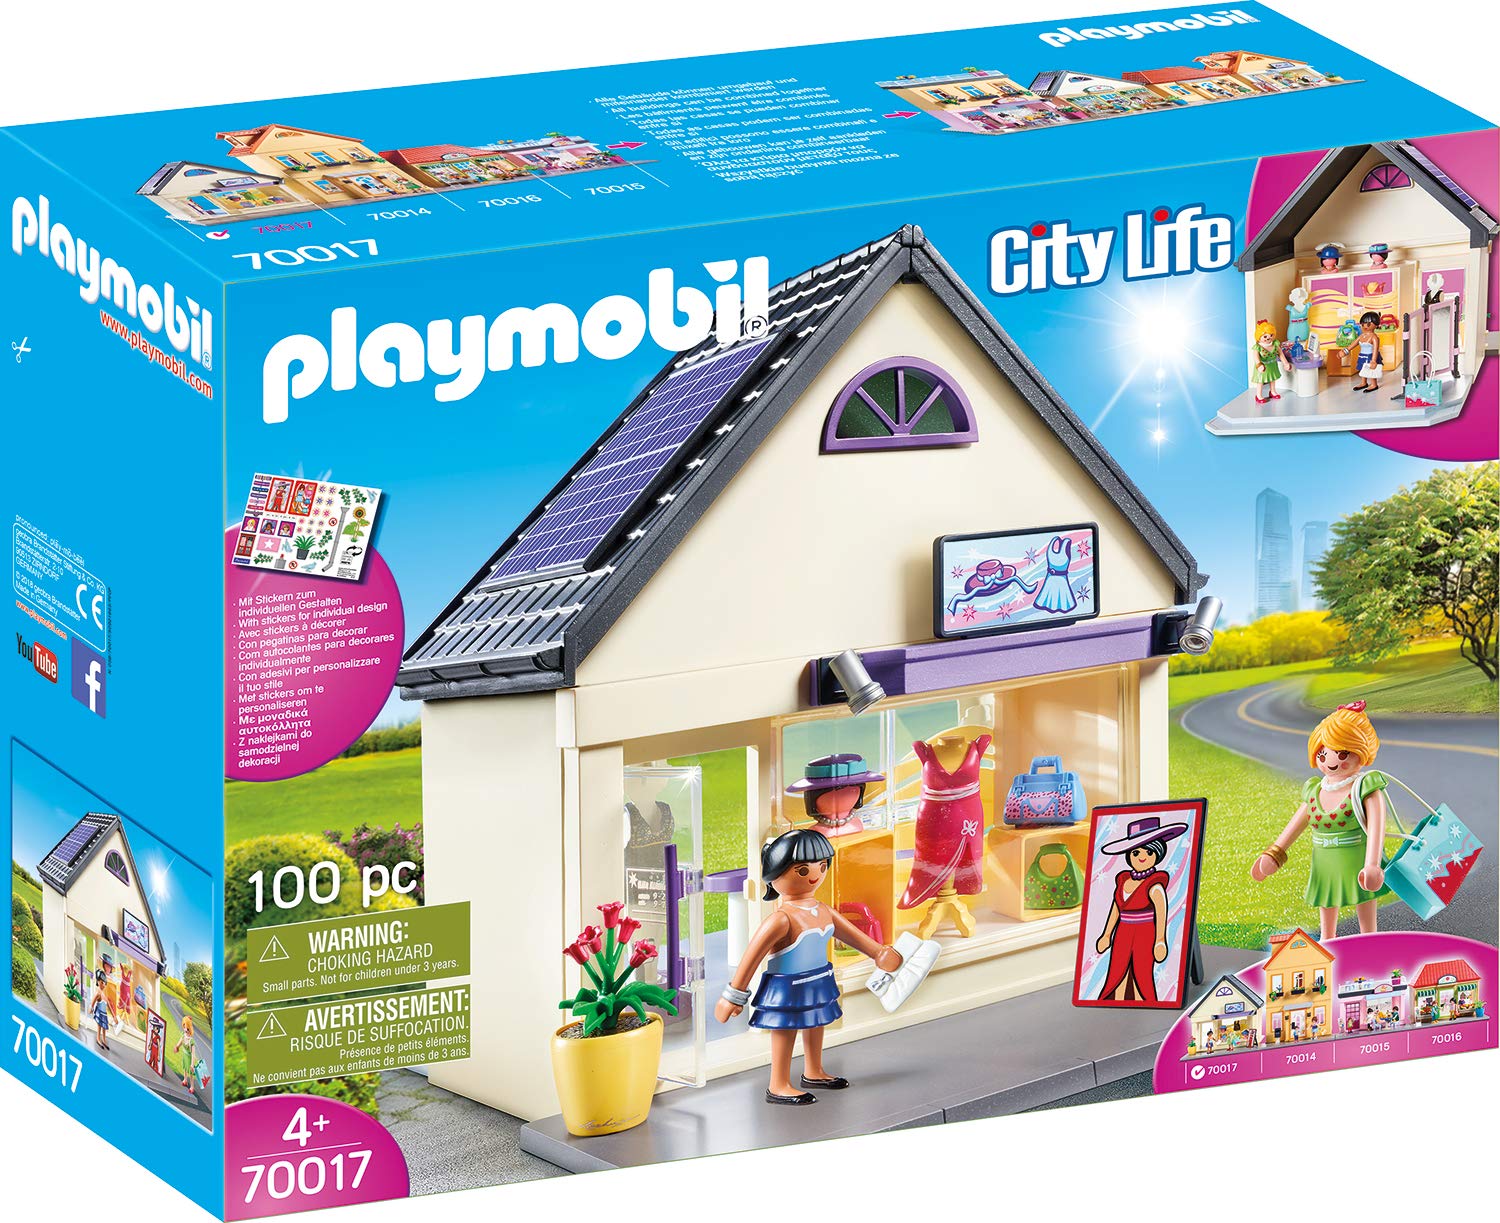 Playmobil City Life My Trendboutique Colourful